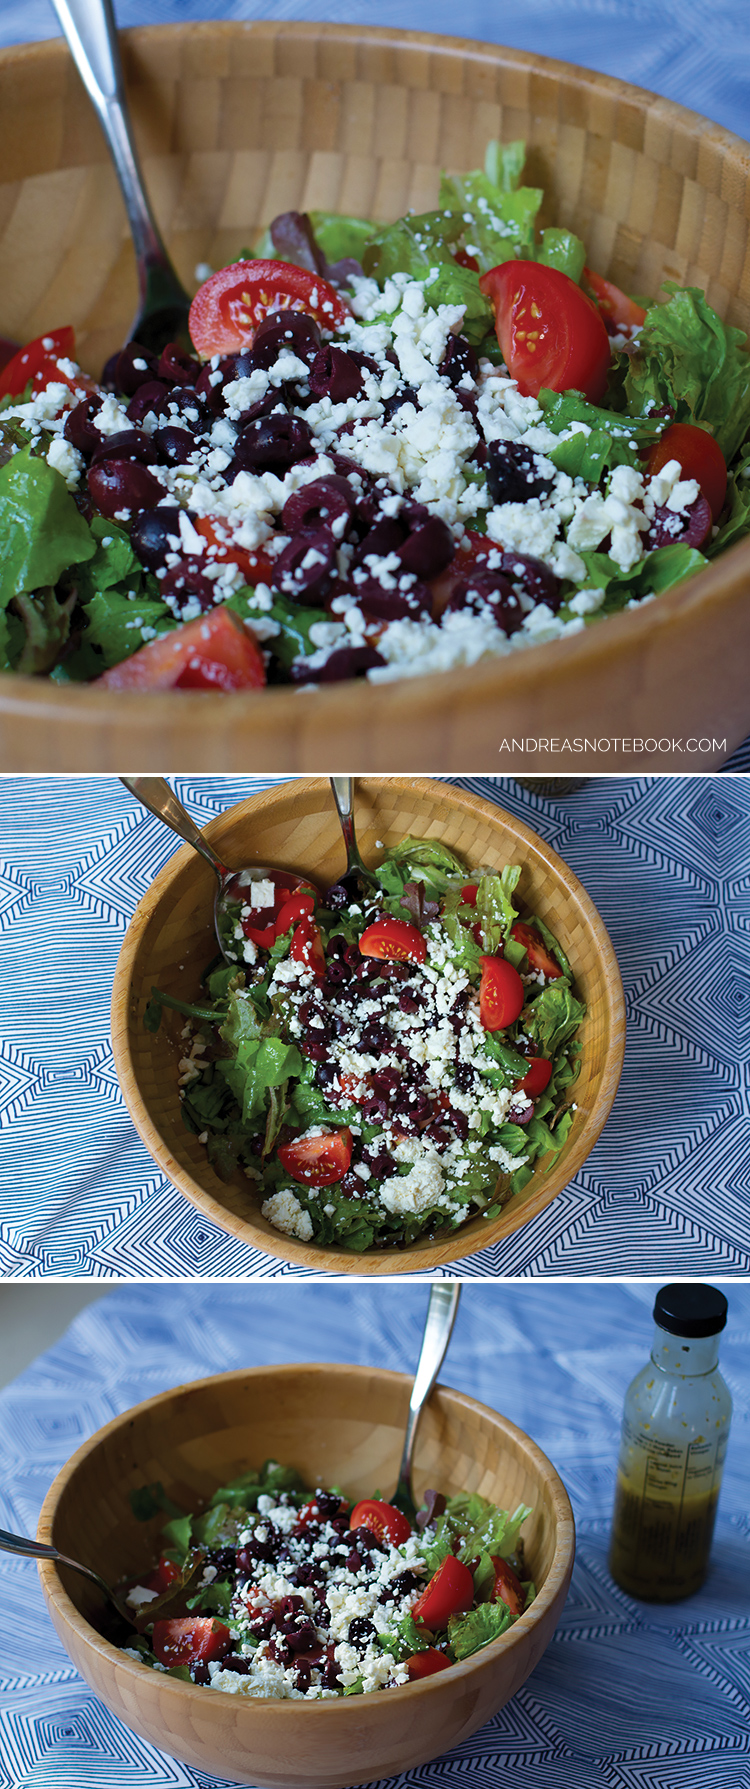 Delicious Greek Salad & Dressing Recipe - I could eat this every day!